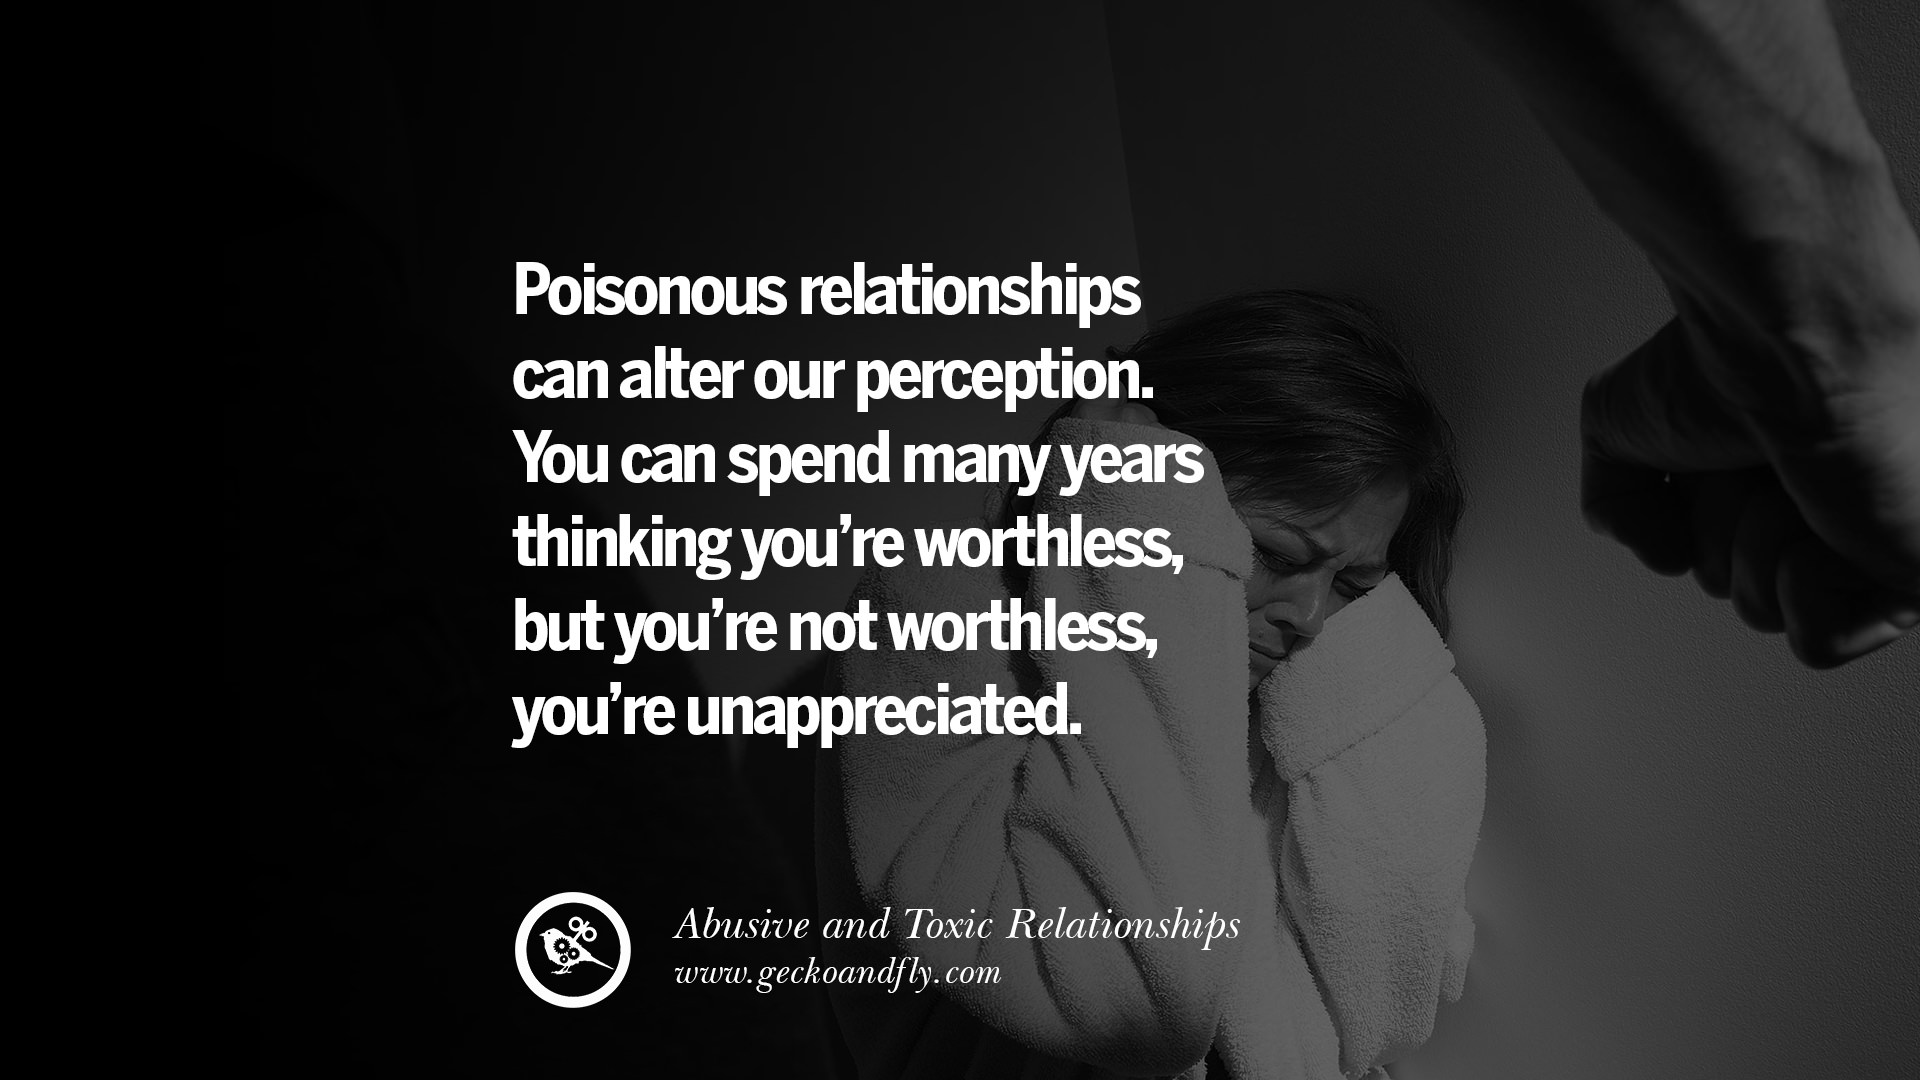 Quotes about physical abuse in relationships